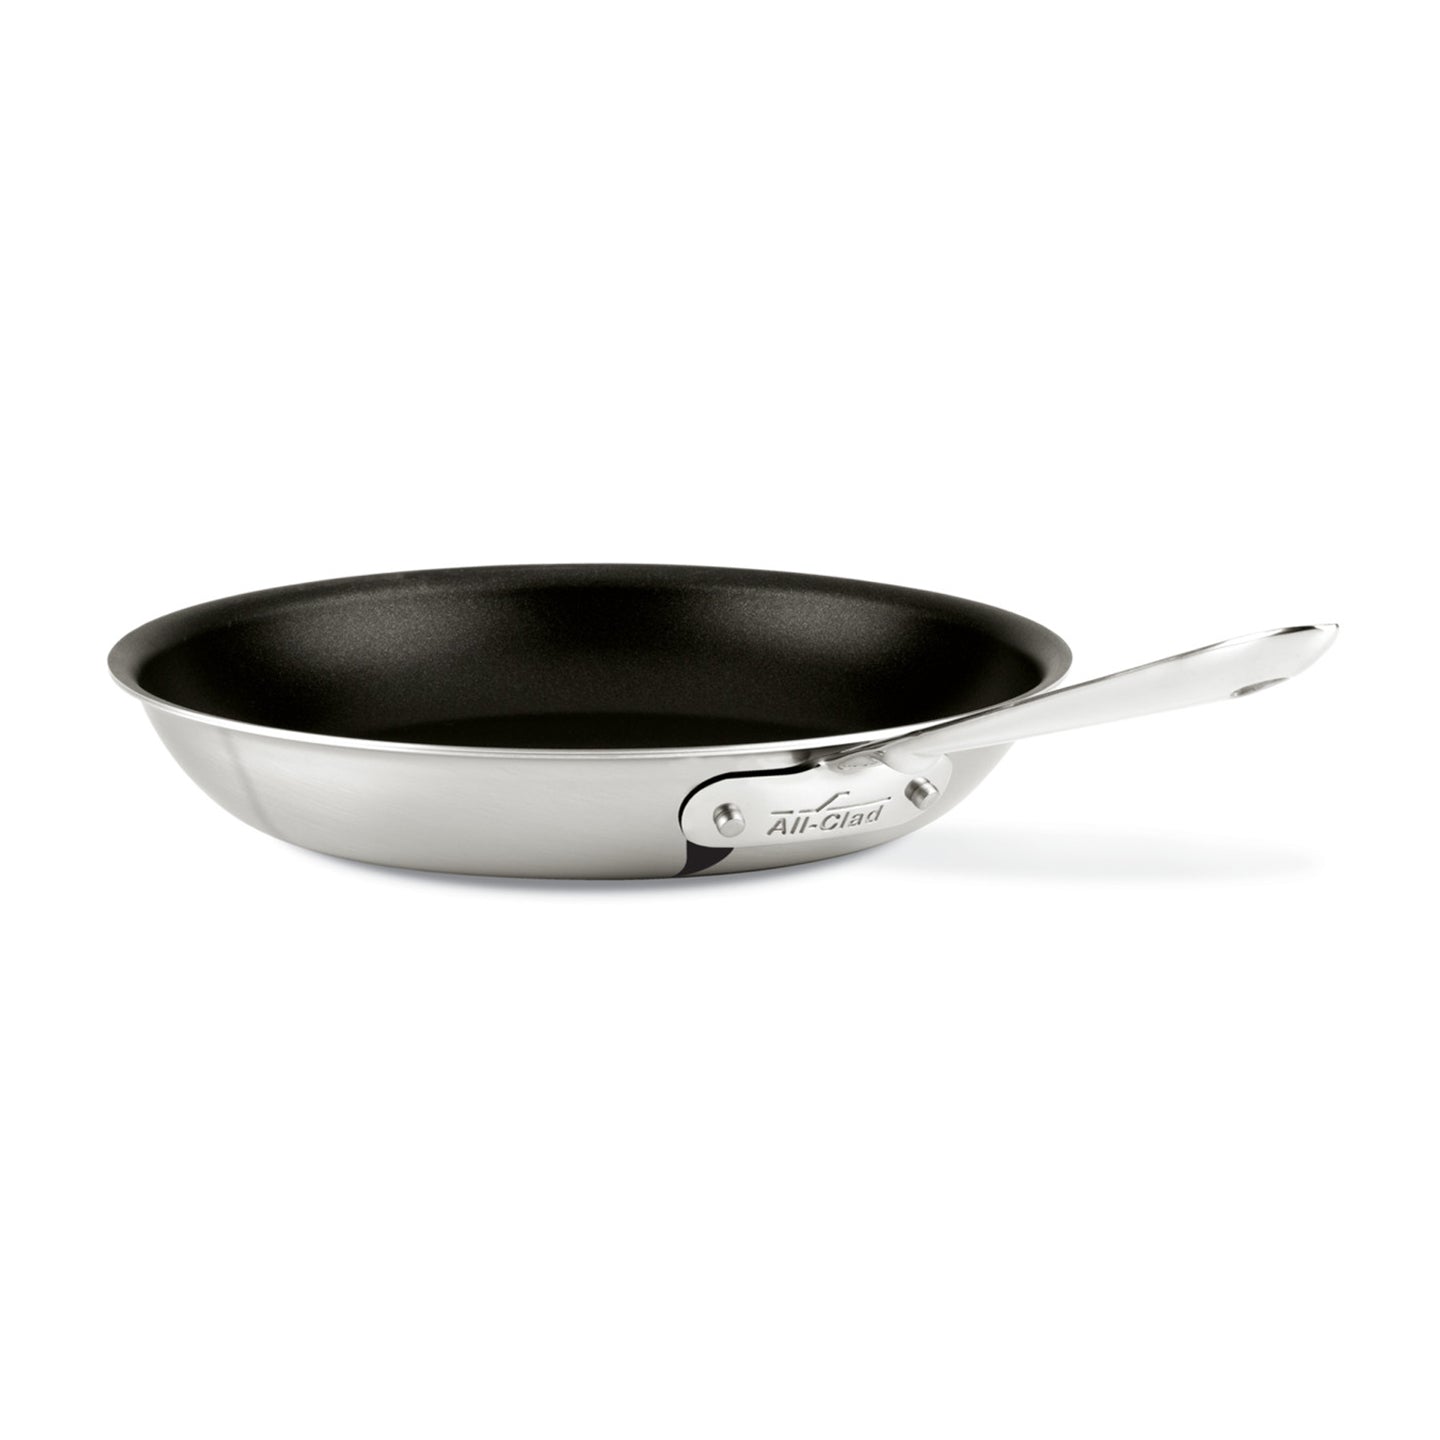 All-Clad d5 Non-Stick Frying Pan